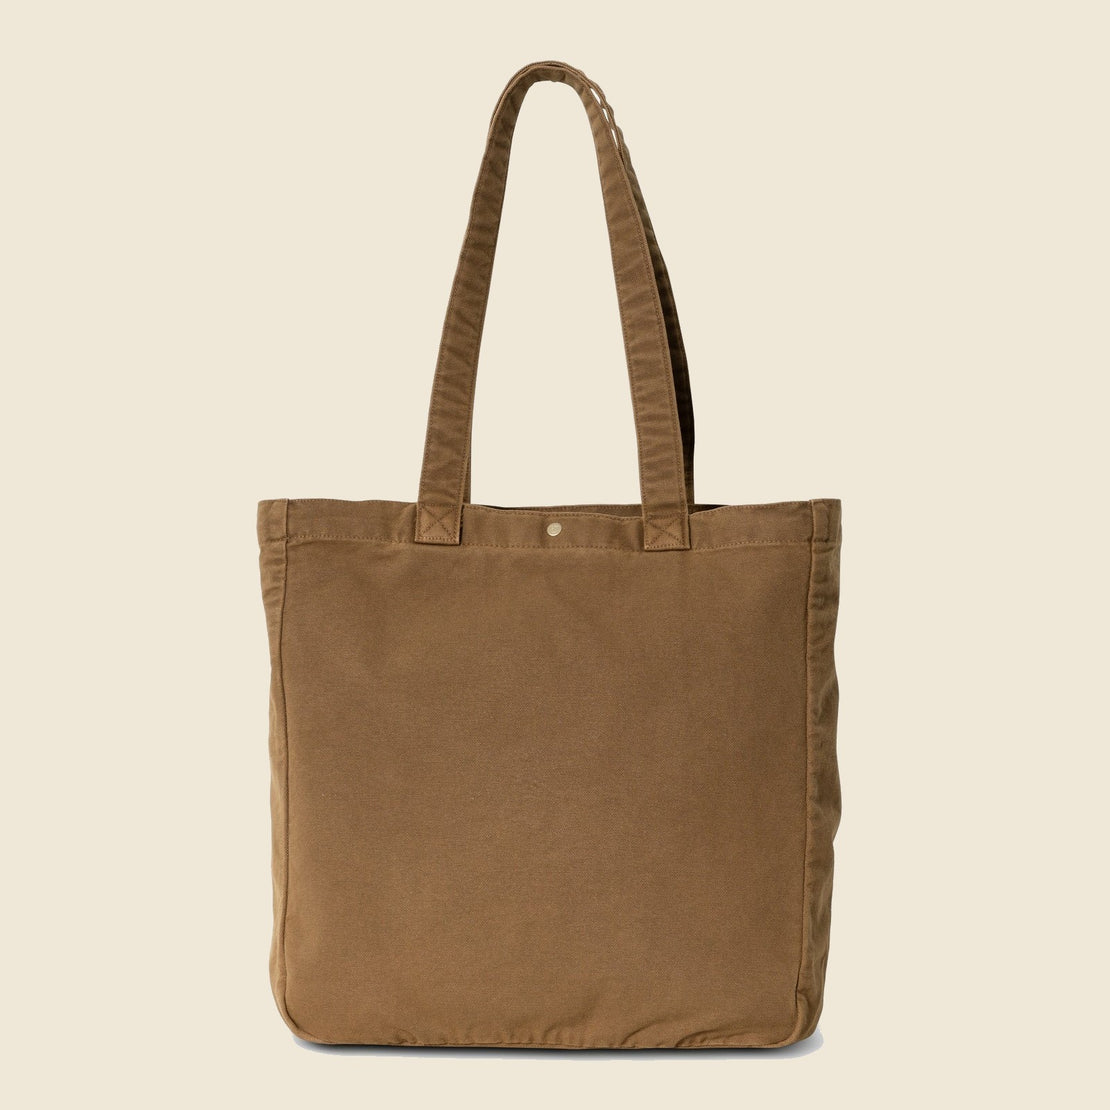 Bayfield Tote - Tamarind Faded - Carhartt WIP - STAG Provisions - W - Accessories - Bag